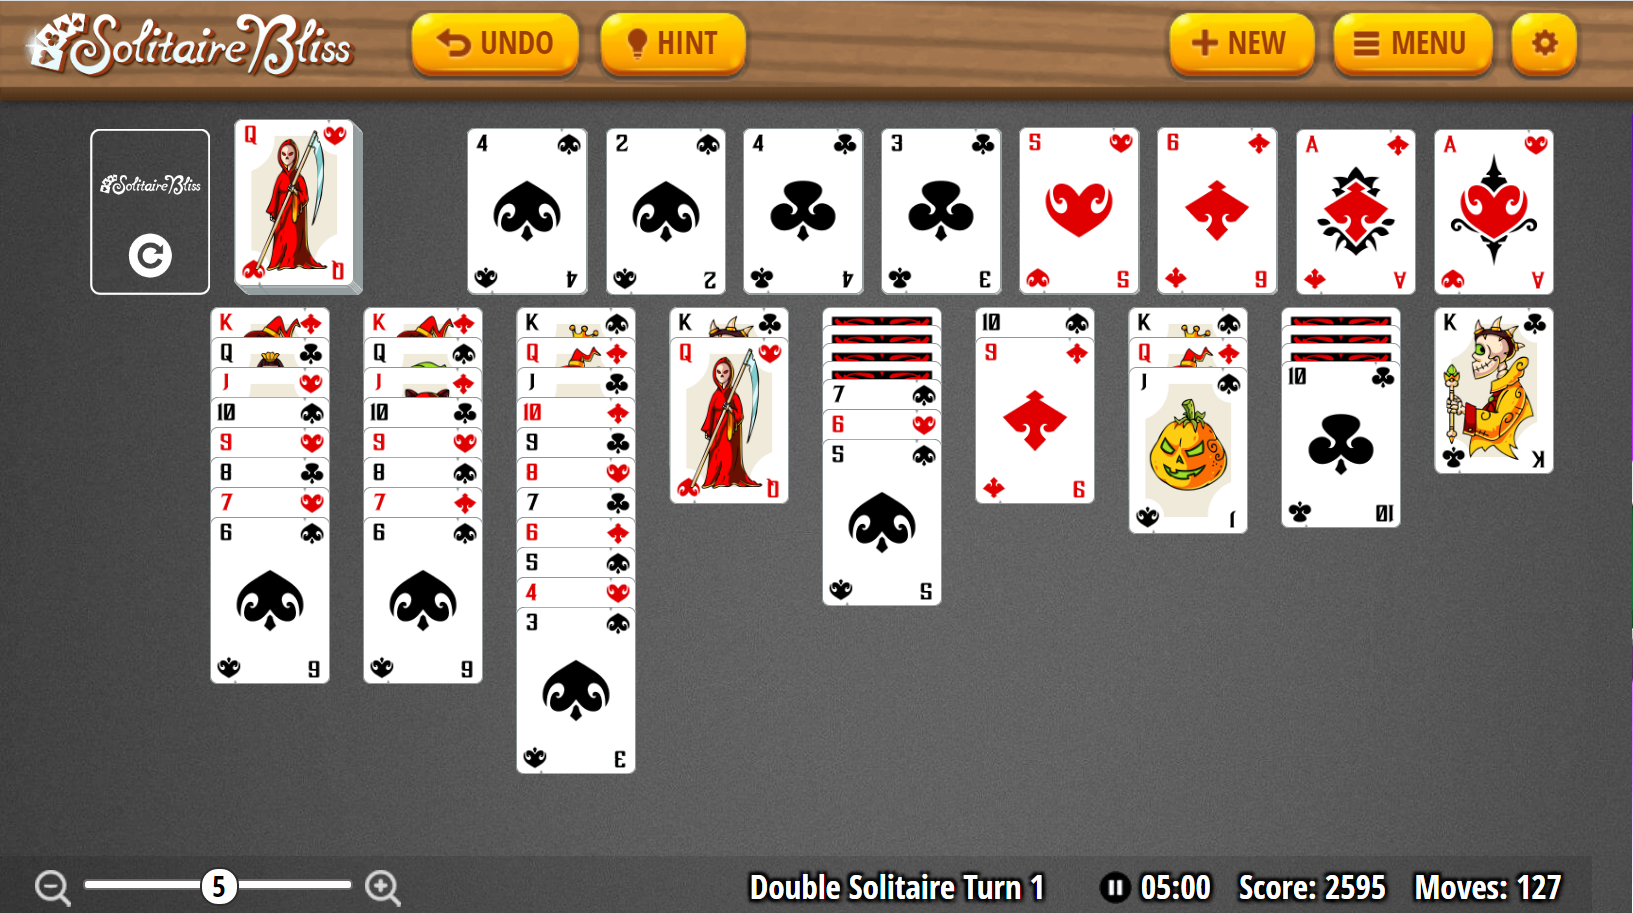 Spider Solitaire 1 Suit, Solitaire Bliss Wiki